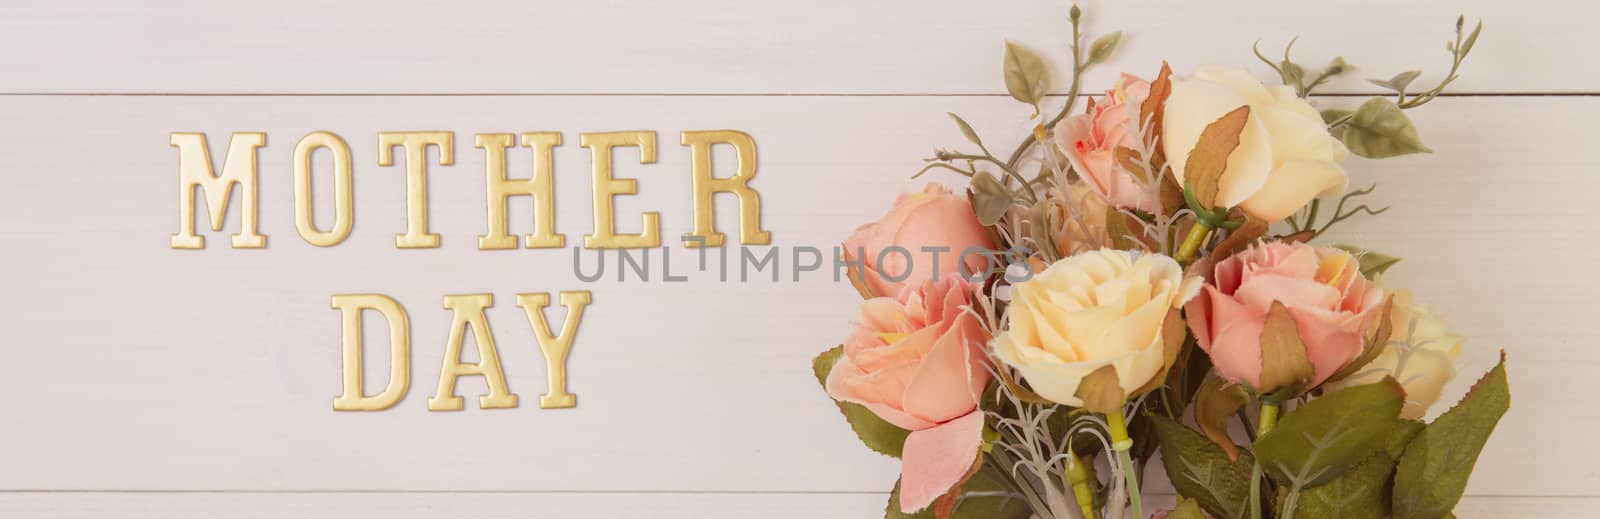 Beautiful flower and text mother day on wooden background with romantic, spring or summer nature for decoration, bouquet floral and word or message for gift on desk, holiday concept, banner website.